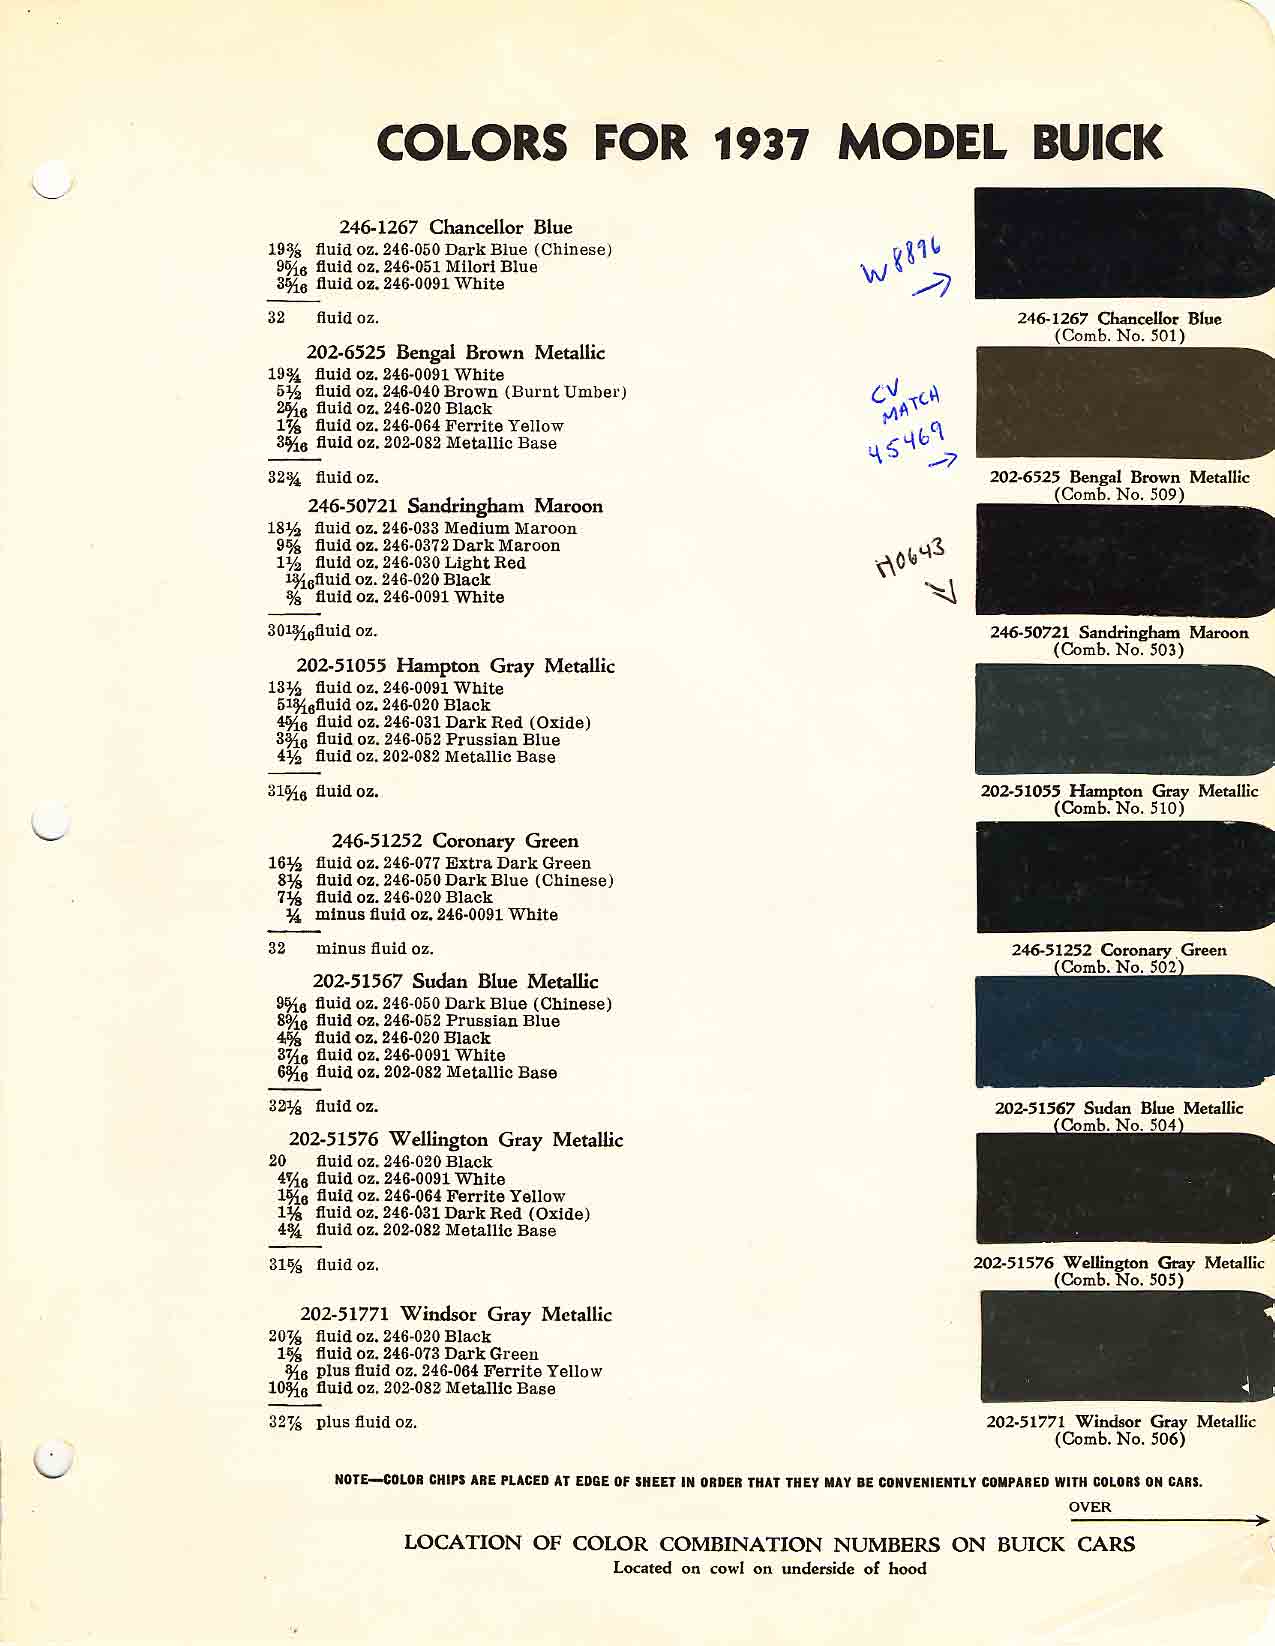 Paint Colors and Codes used on Buick In 1937